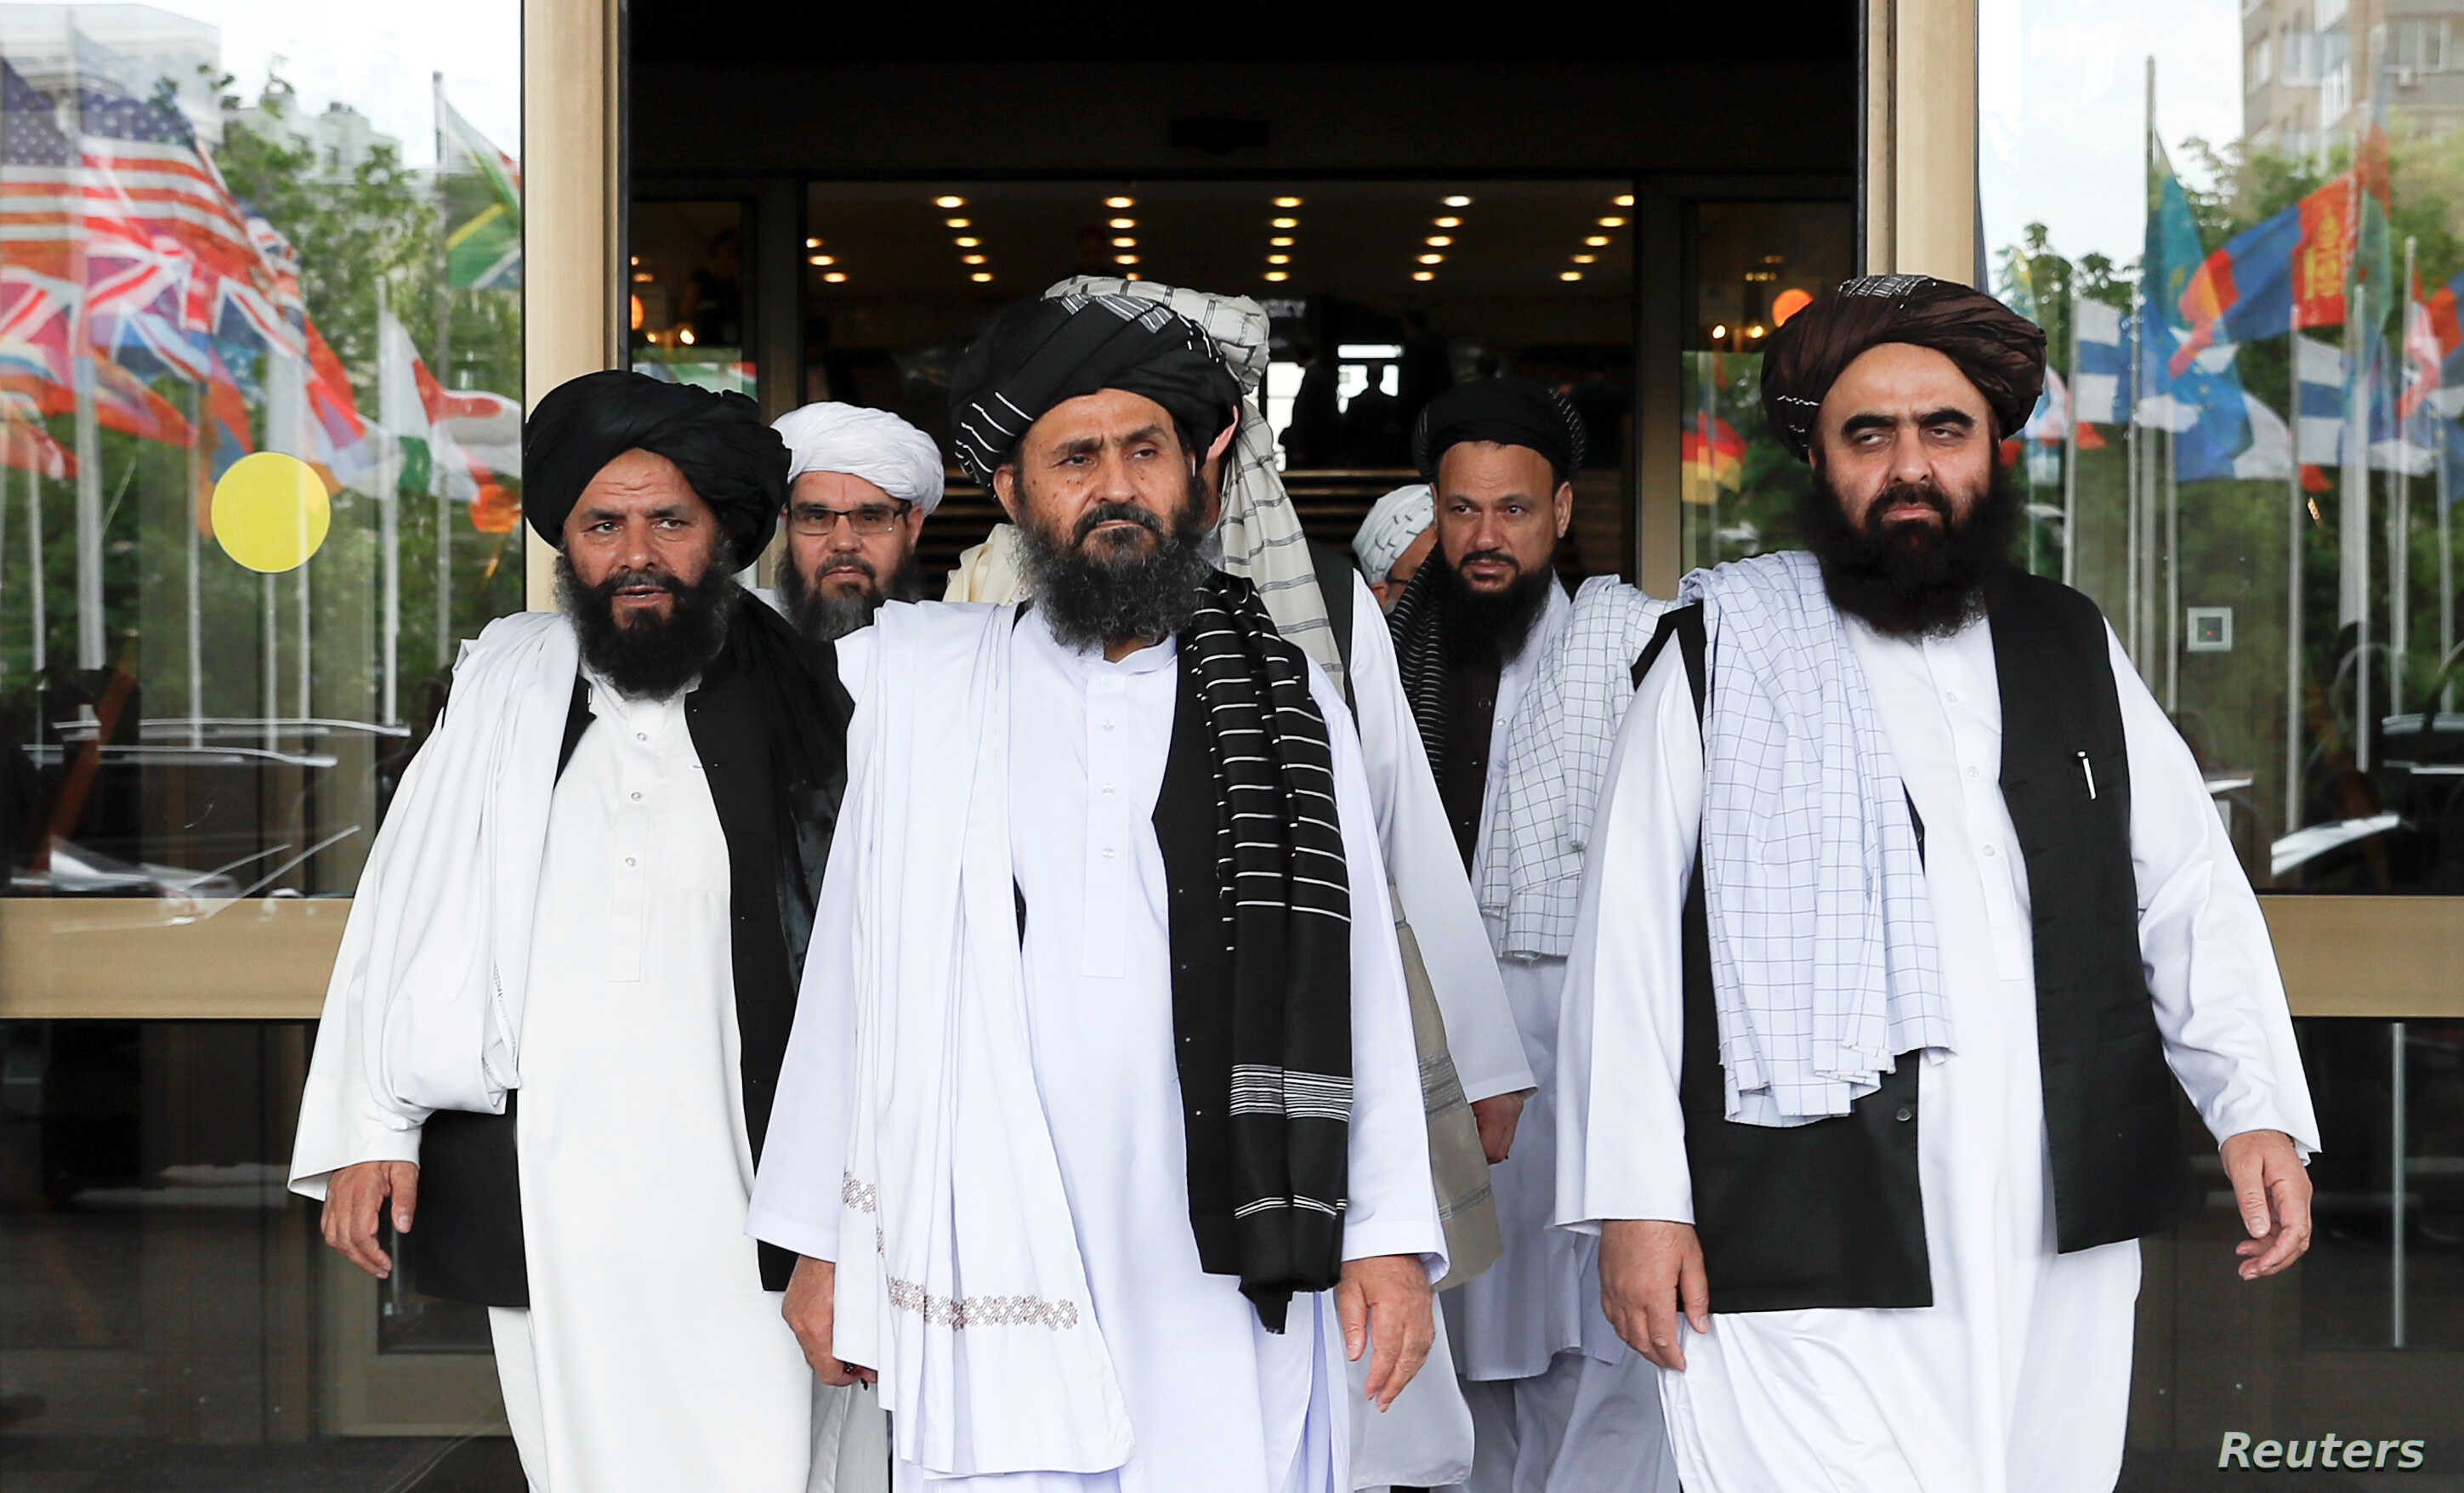 Taliban will form 12-member Council in Afghanistan